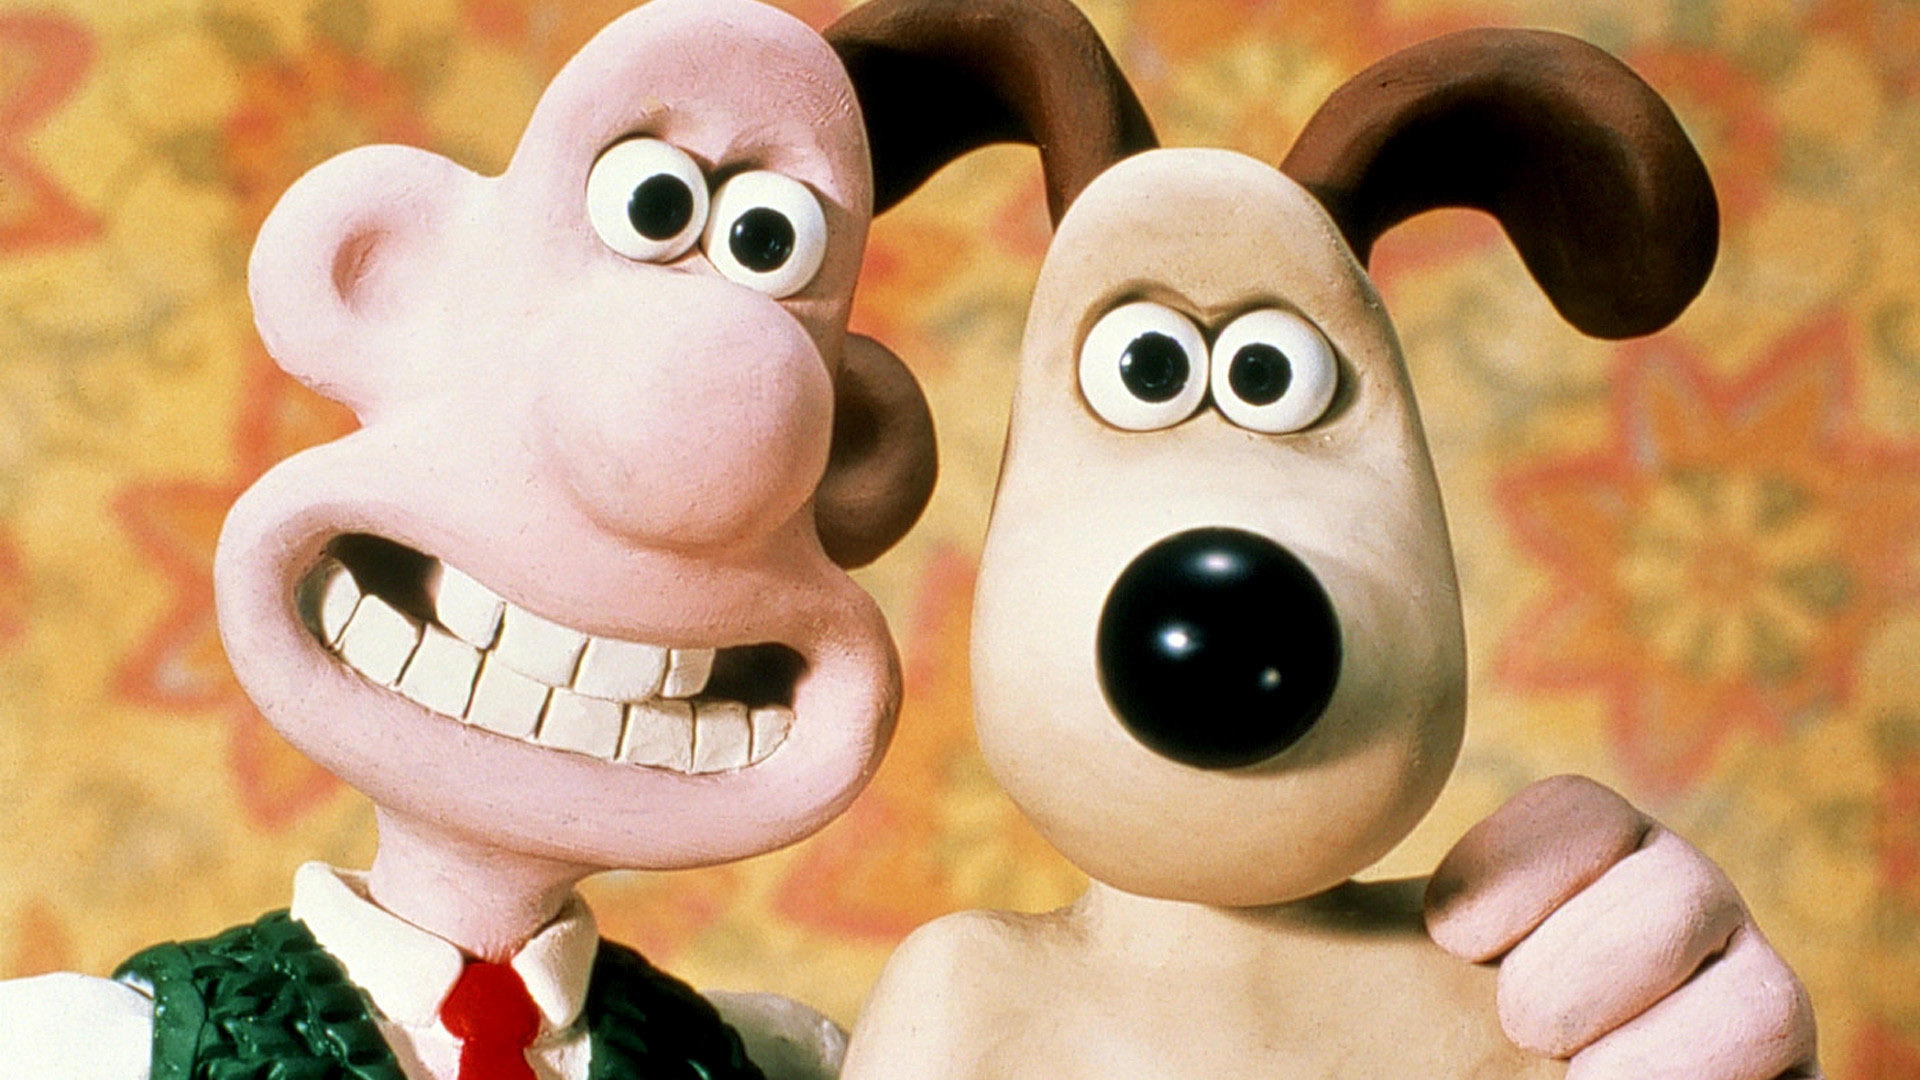 Show Wallace & Gromit